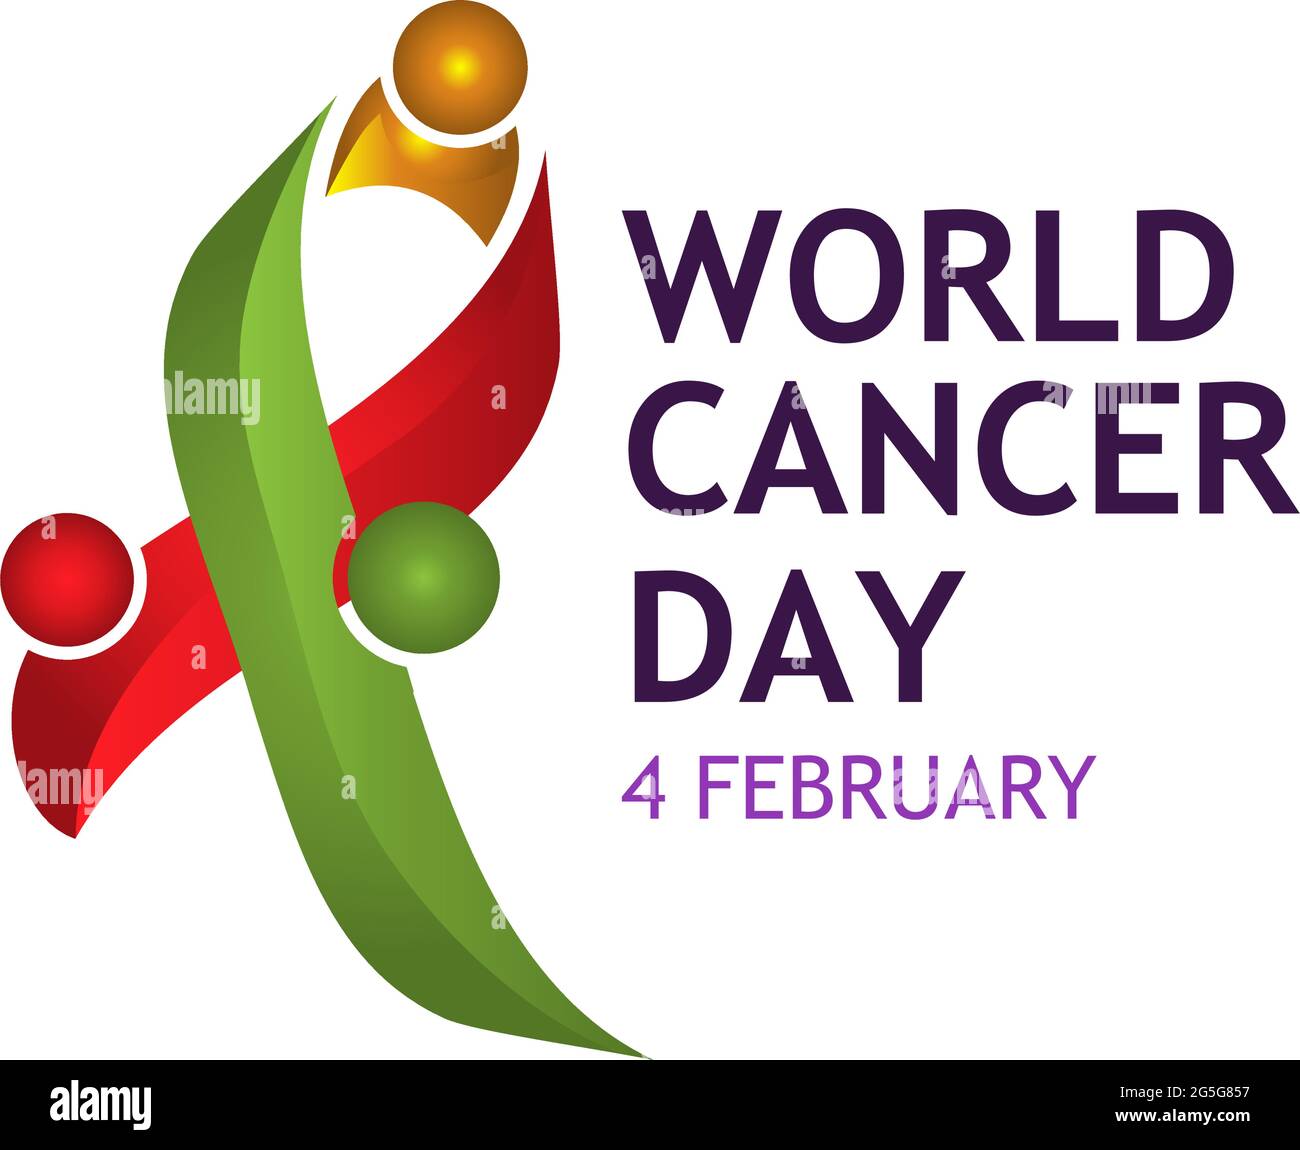 World cancer day 4 february text with ribbon tree. Vector illustration concept for world cancer day Stock Vector